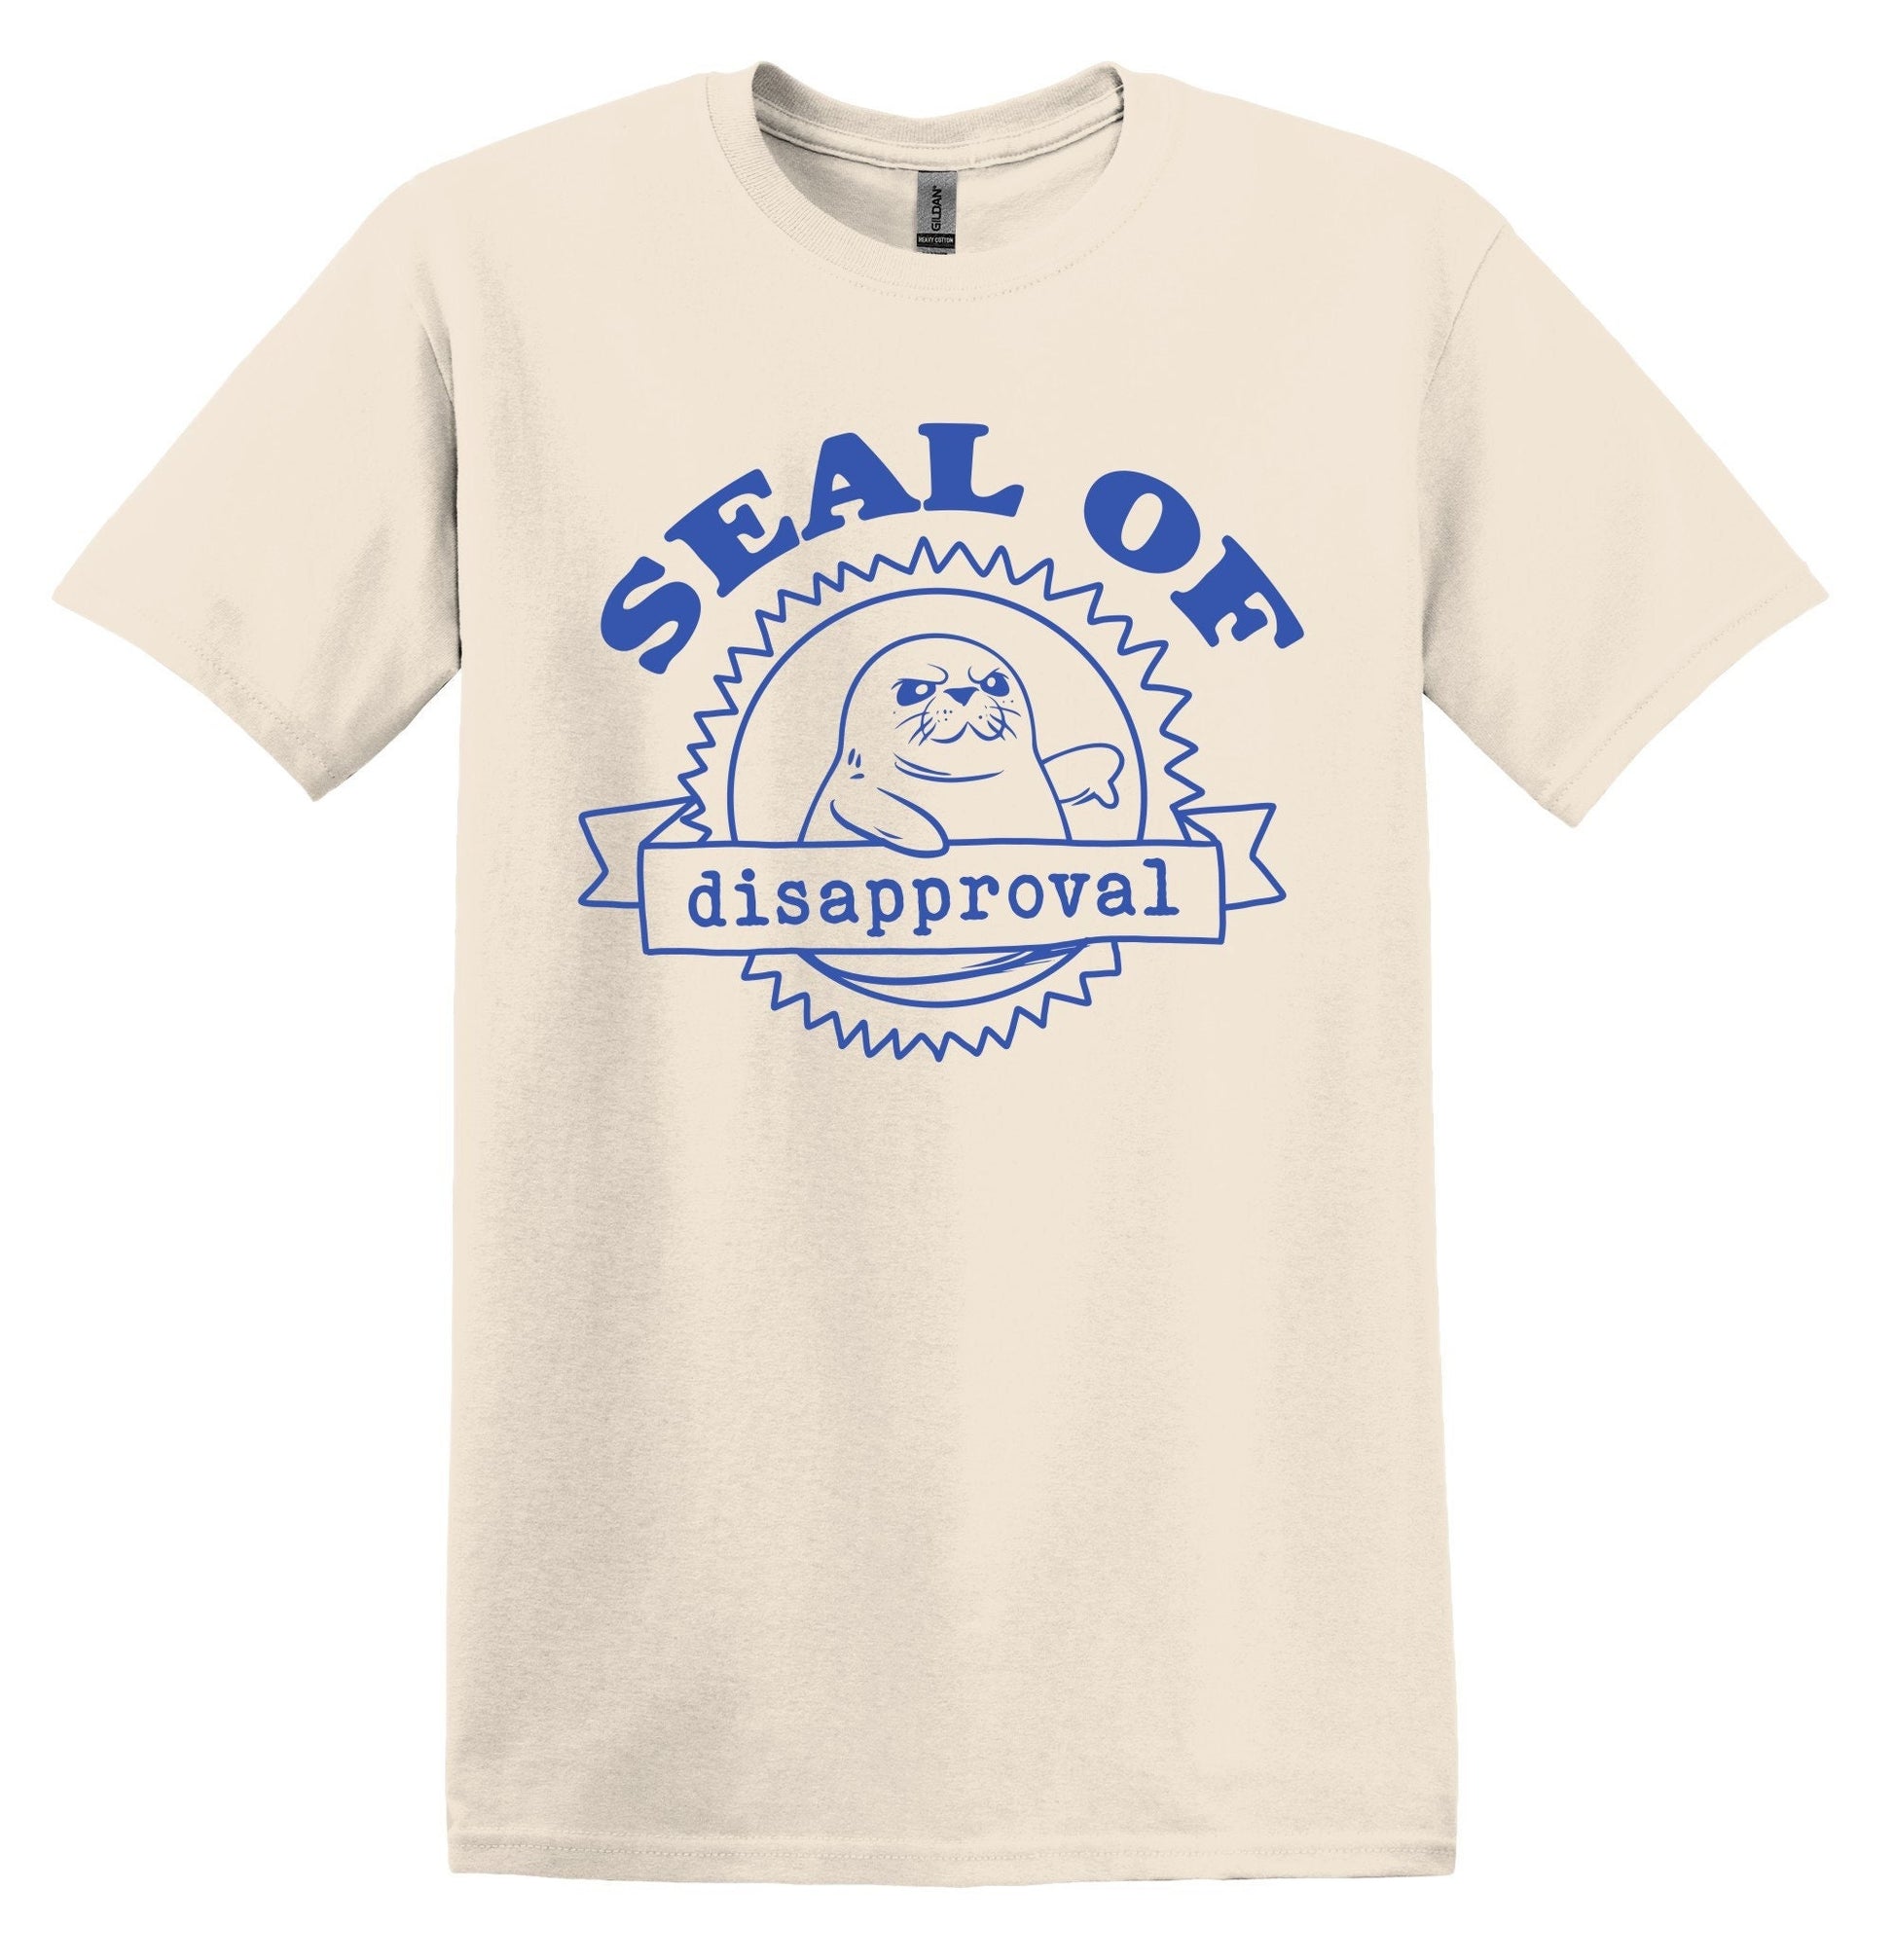 Seal of Disapproval Shirt - Funny Graphic Tee